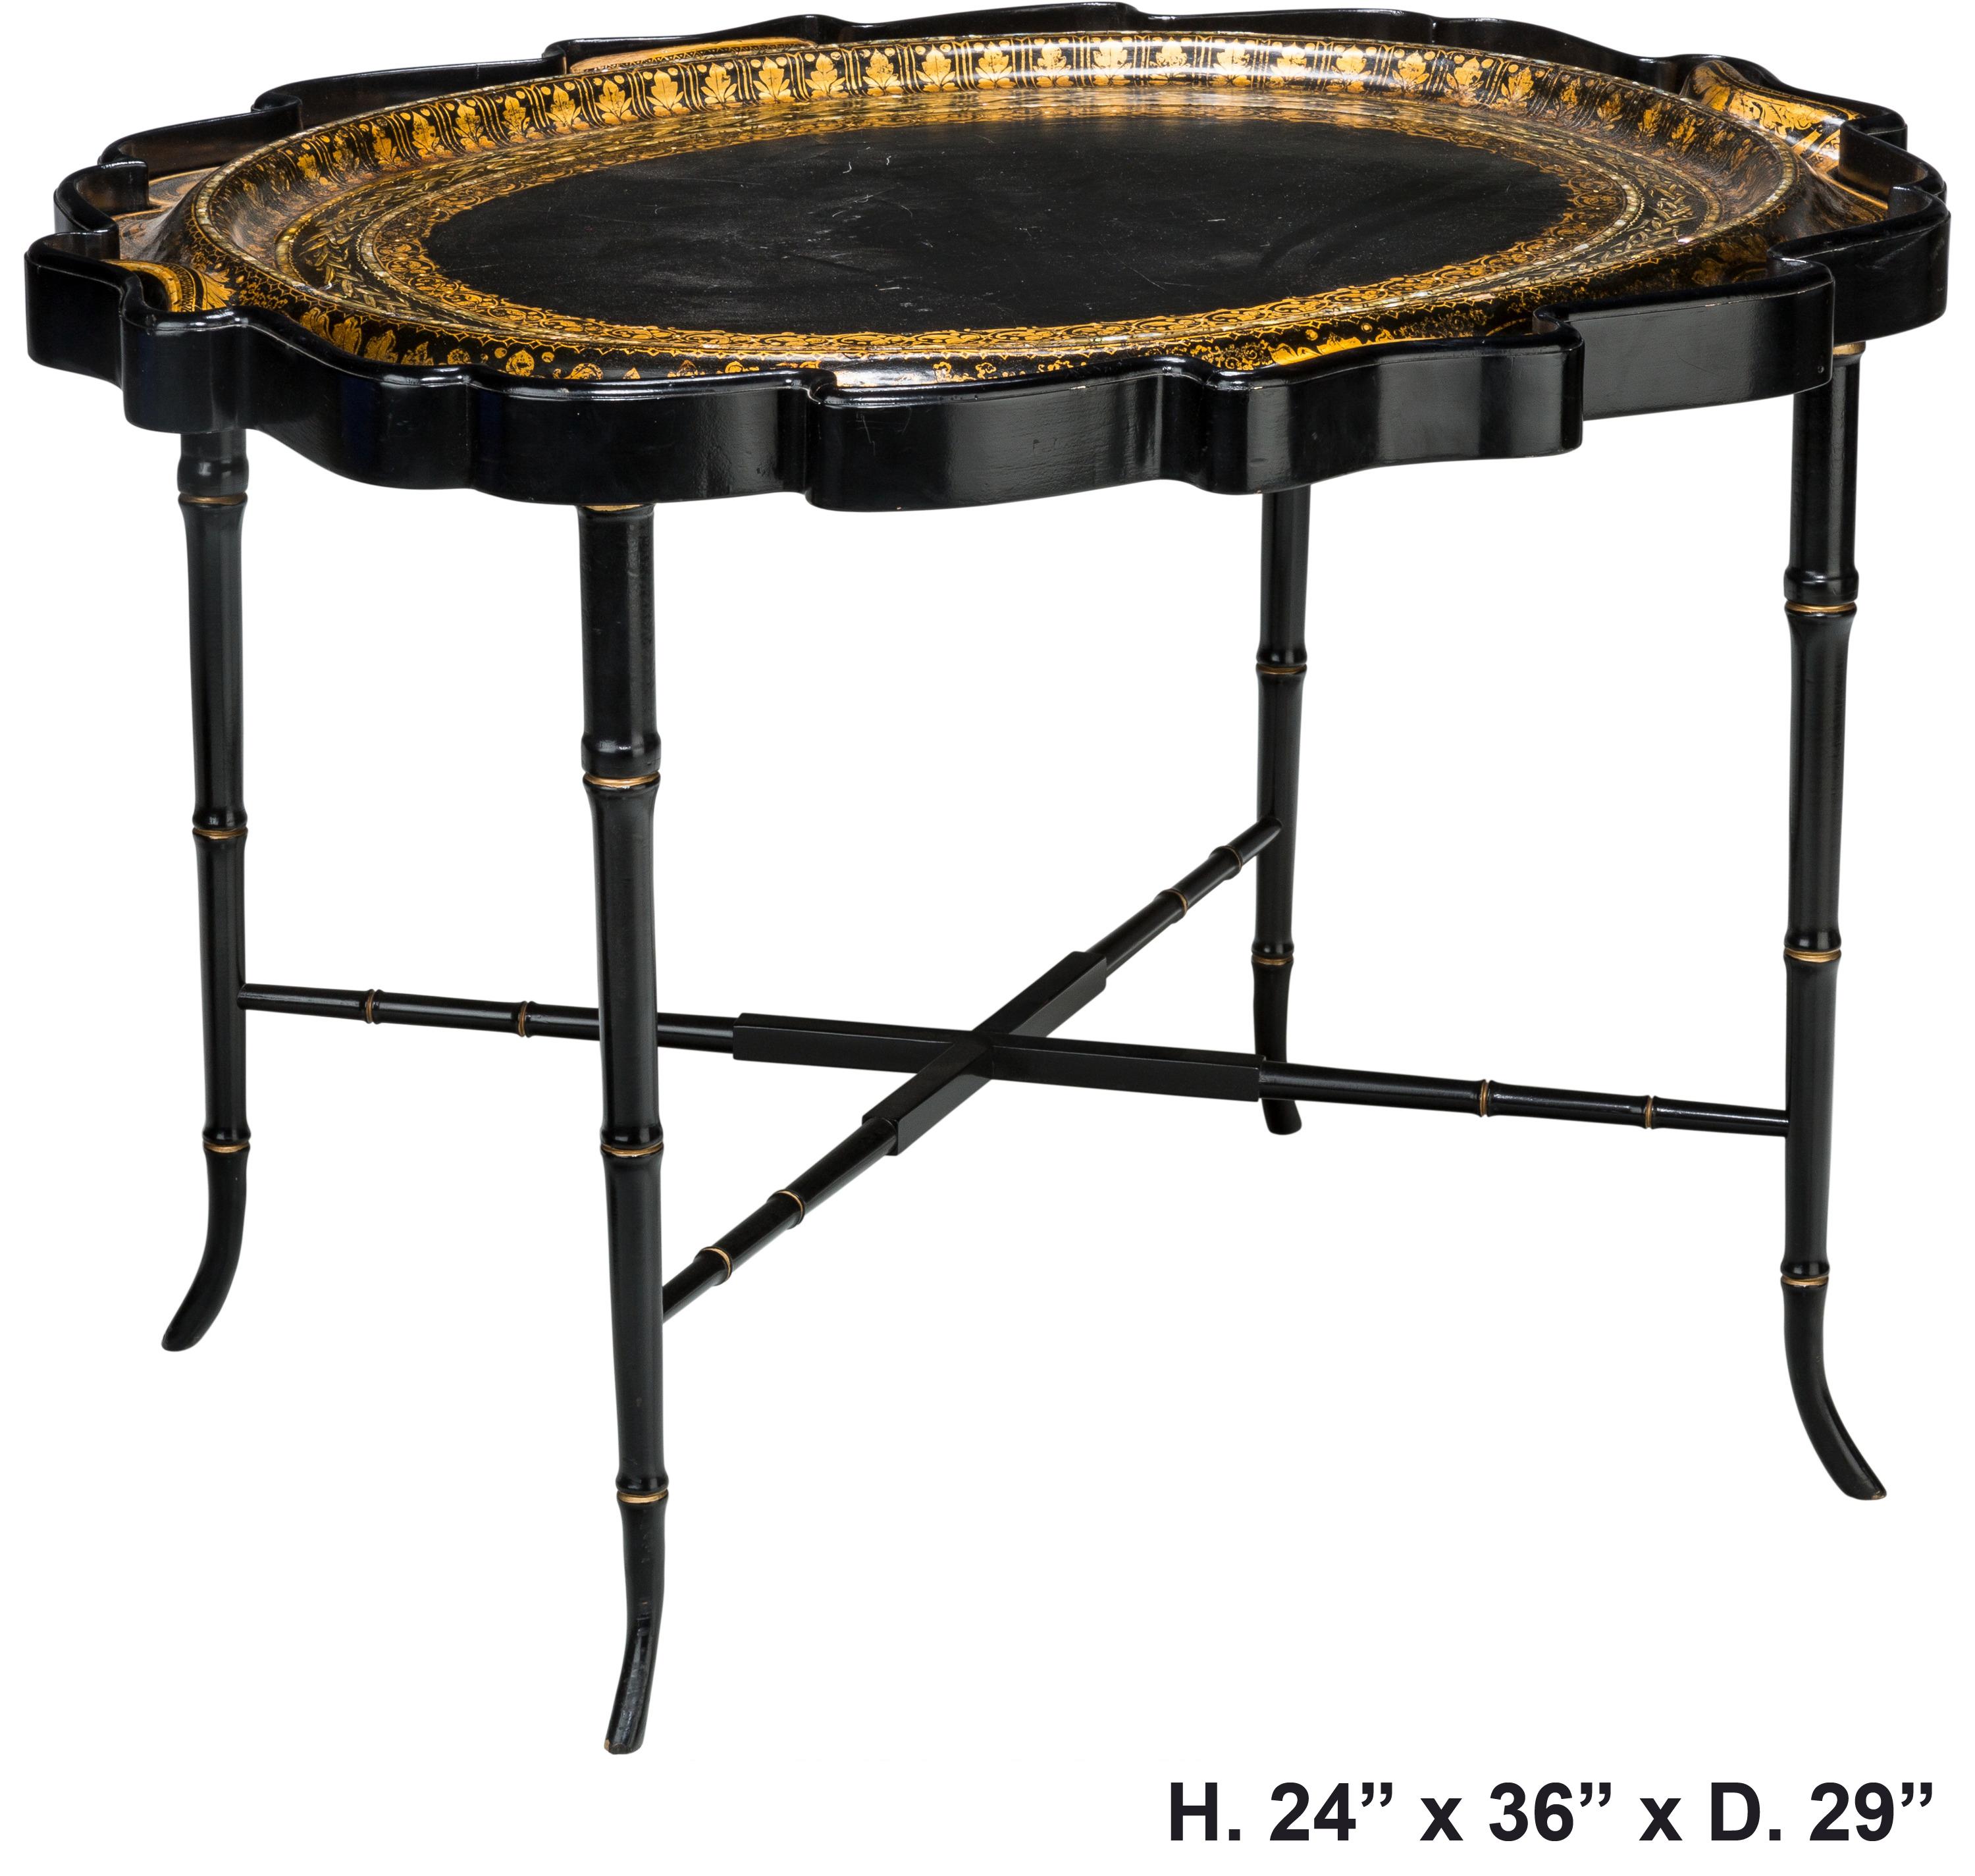 Beautiful 19c English partial Gilt and Mother of Pearl paper mache tray table on ebonized bamboo base, excellent details and good condition